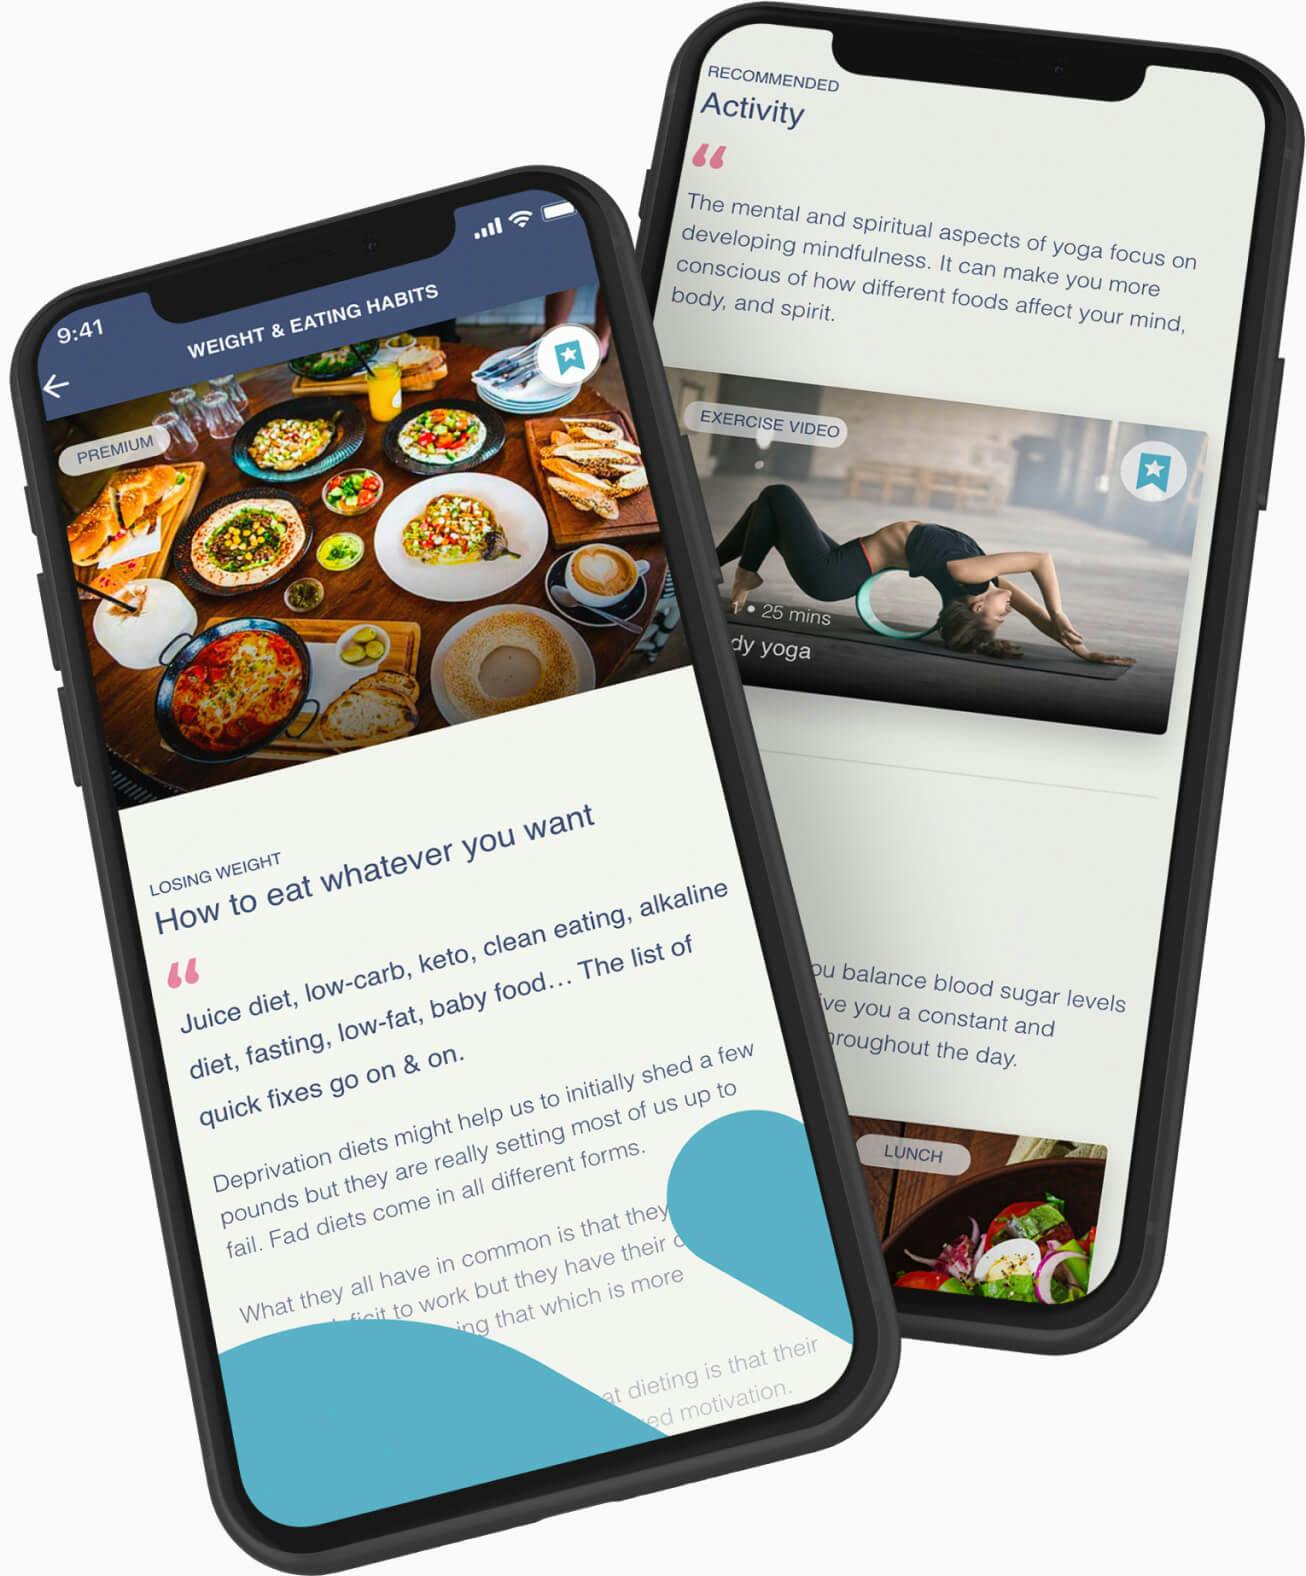 Recommended articles on eating habits inside a health app